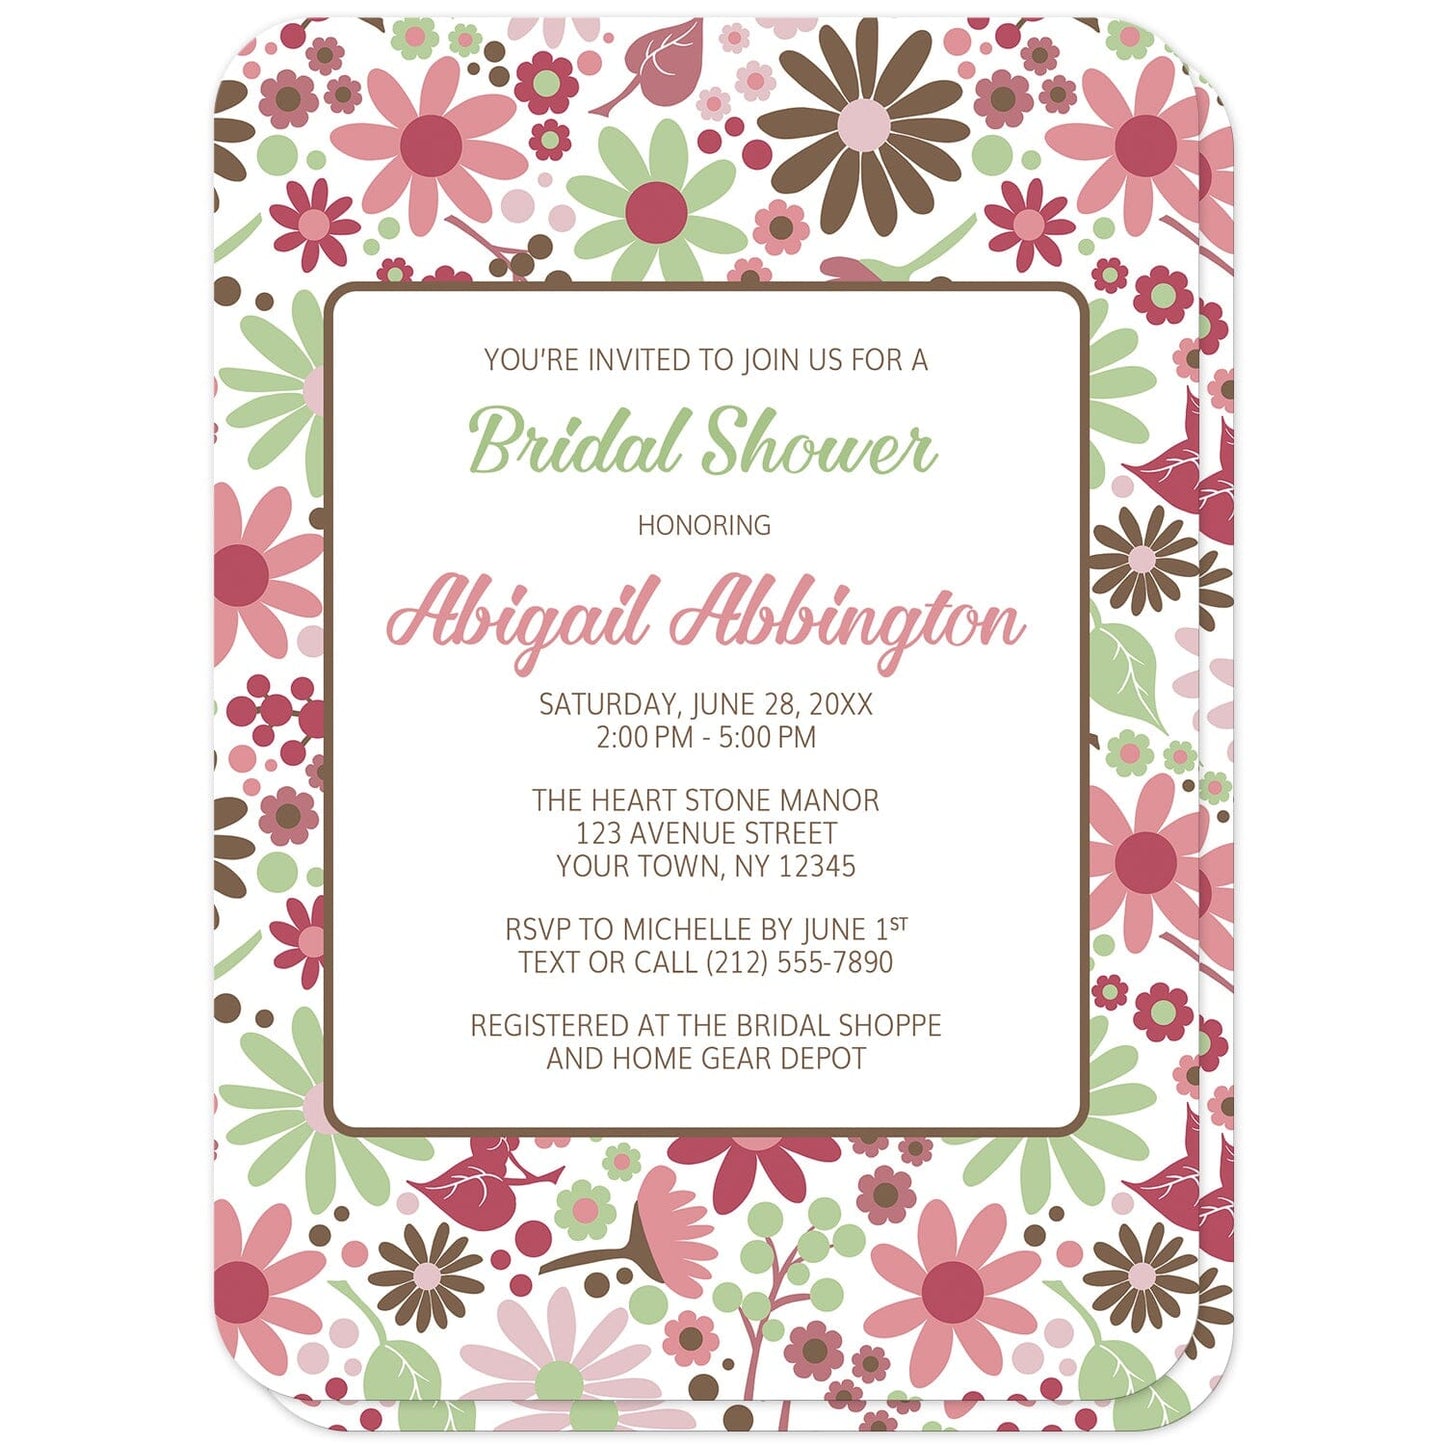 Berry Green Summer Flowers Bridal Shower Invitations (front with rounded corners) at Artistically Invited. Beautiful berry green summer flowers bridal shower invitations designed with a pretty summer floral pattern in different hues of berry pink with green and brown. Your personalized bridal shower celebration details are custom printed in green, pink, and brown on white over the flowers pattern.